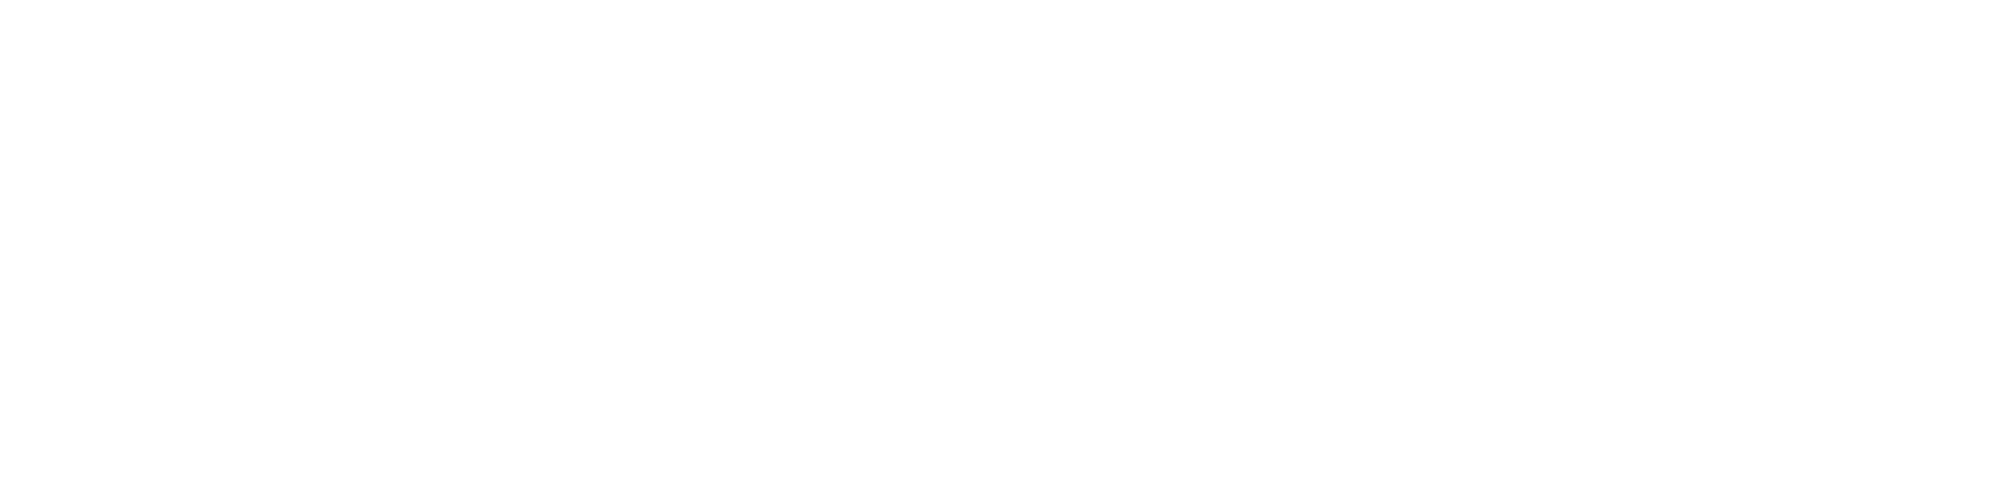 In partnership with the Prince’s Trust